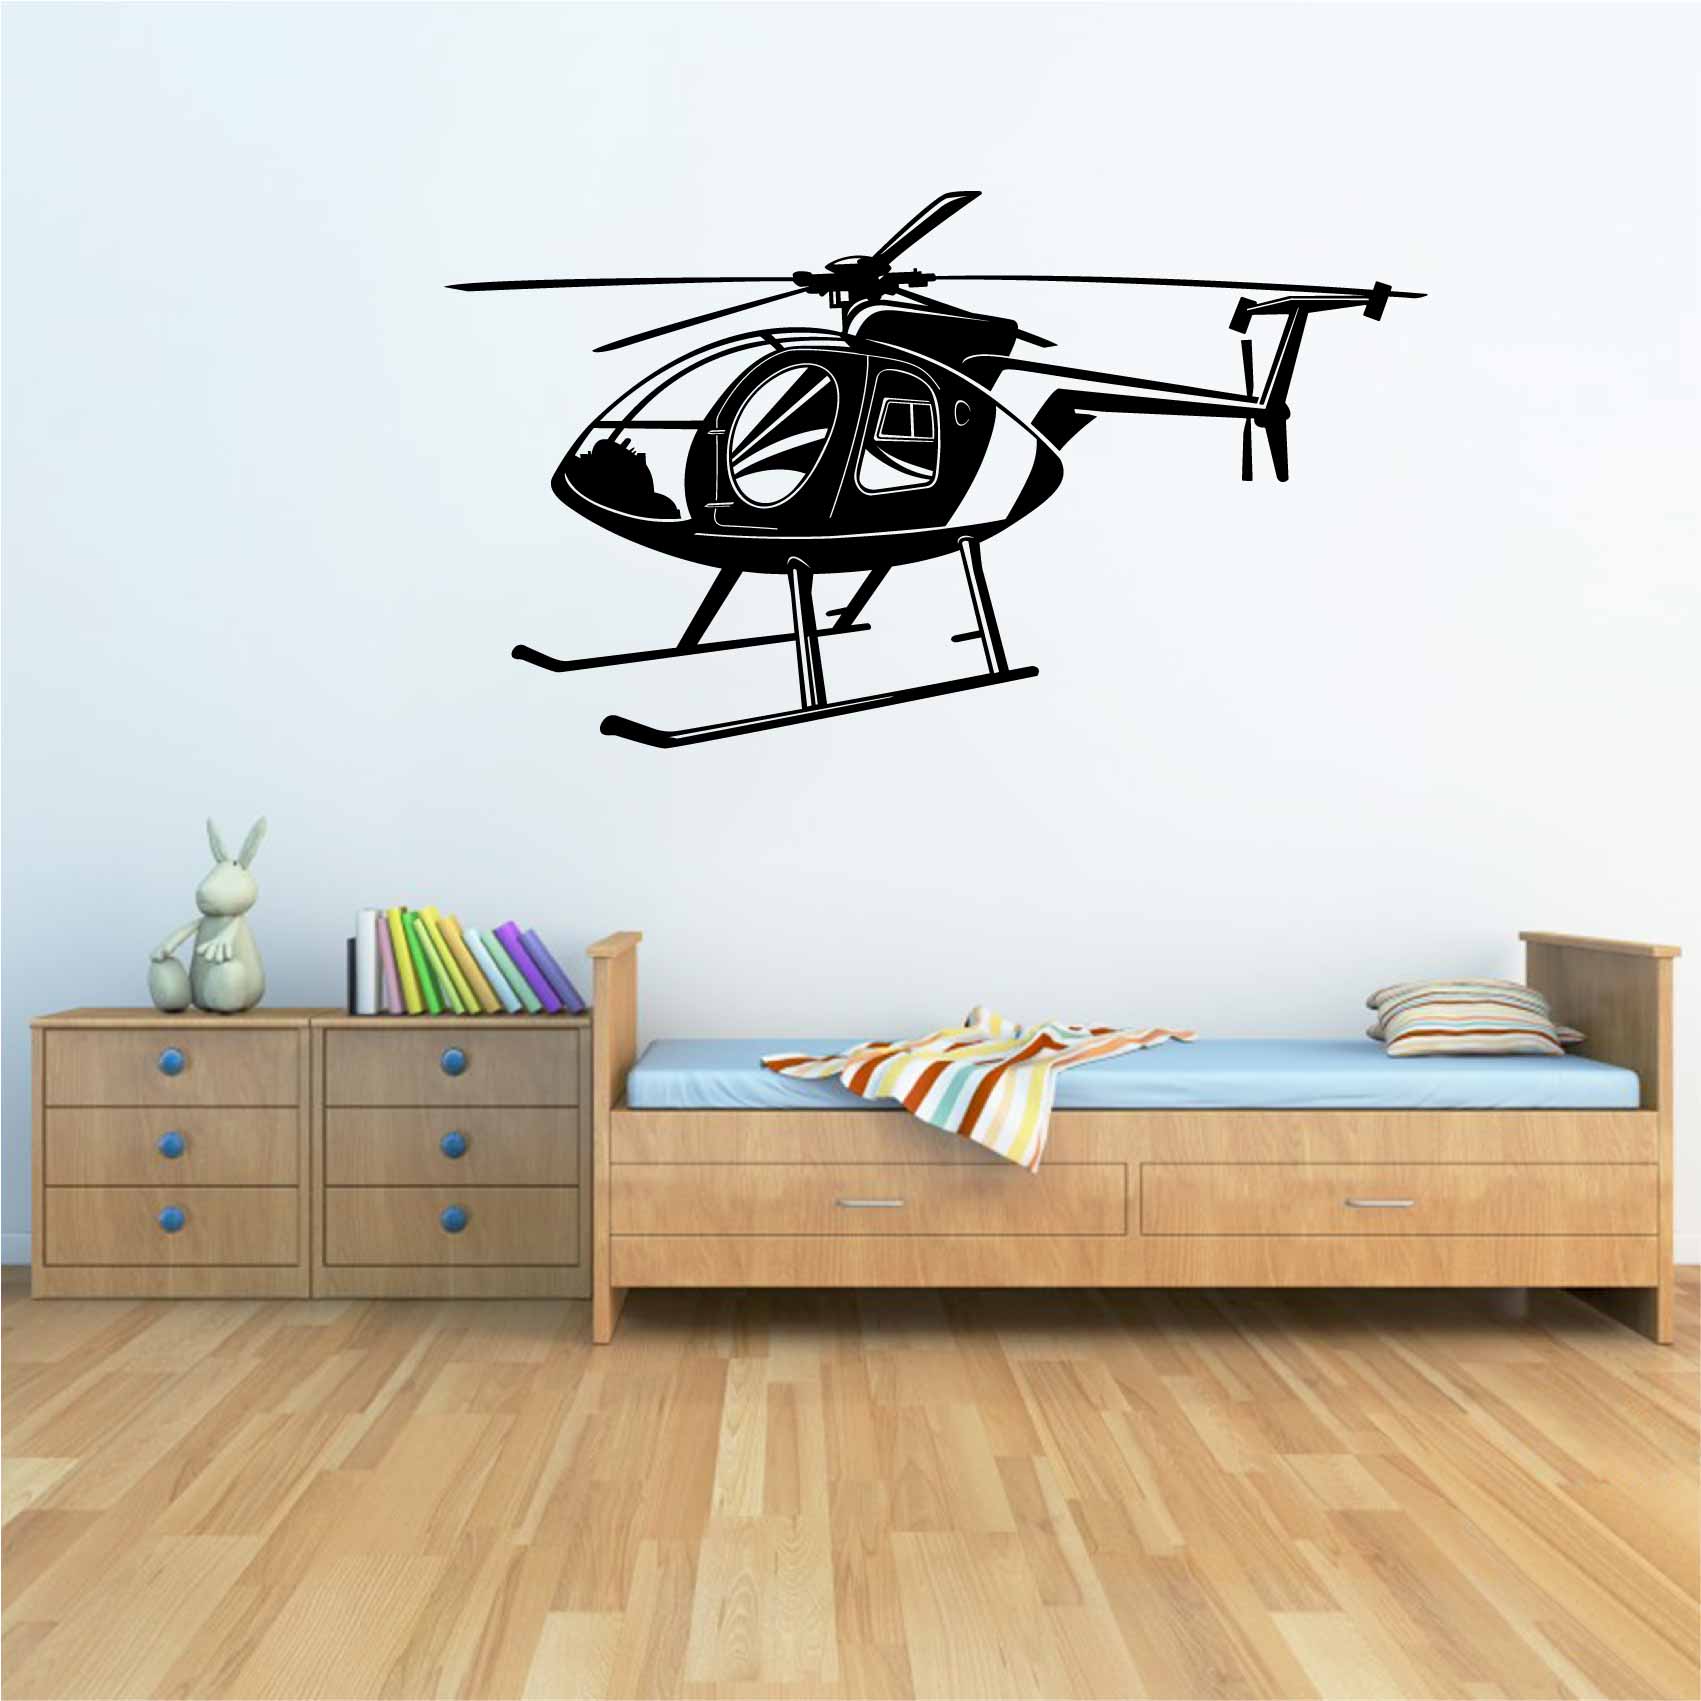 stickers-mural-helicoptere-ref6helicoptere-stickers-muraux-helicoptere-autocollant-deco-chambre-enfant-sticker-mural-hélicoptère